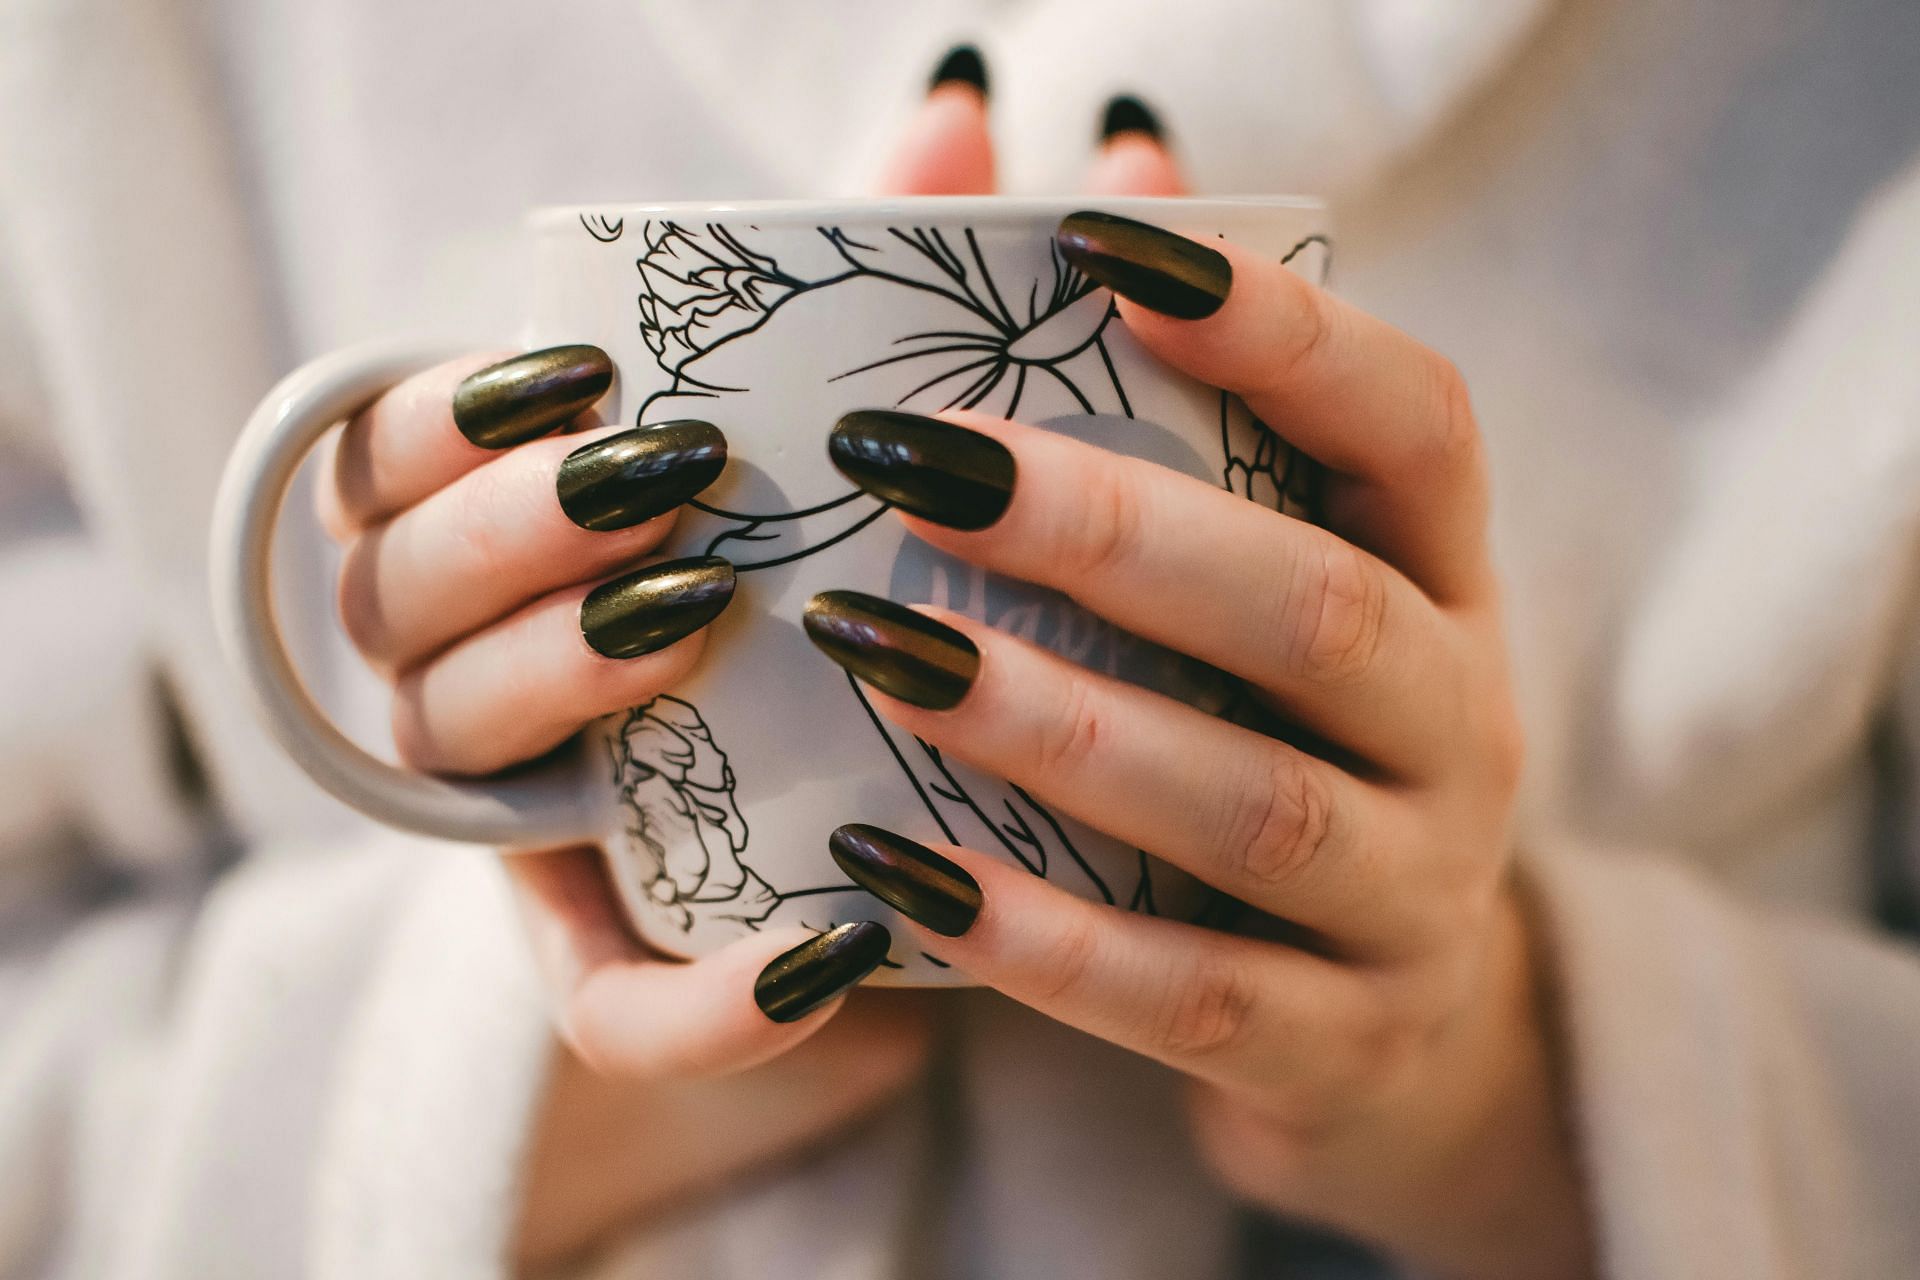 tips to stop picking nails (image sourced via Pexels / Photo by lisa)